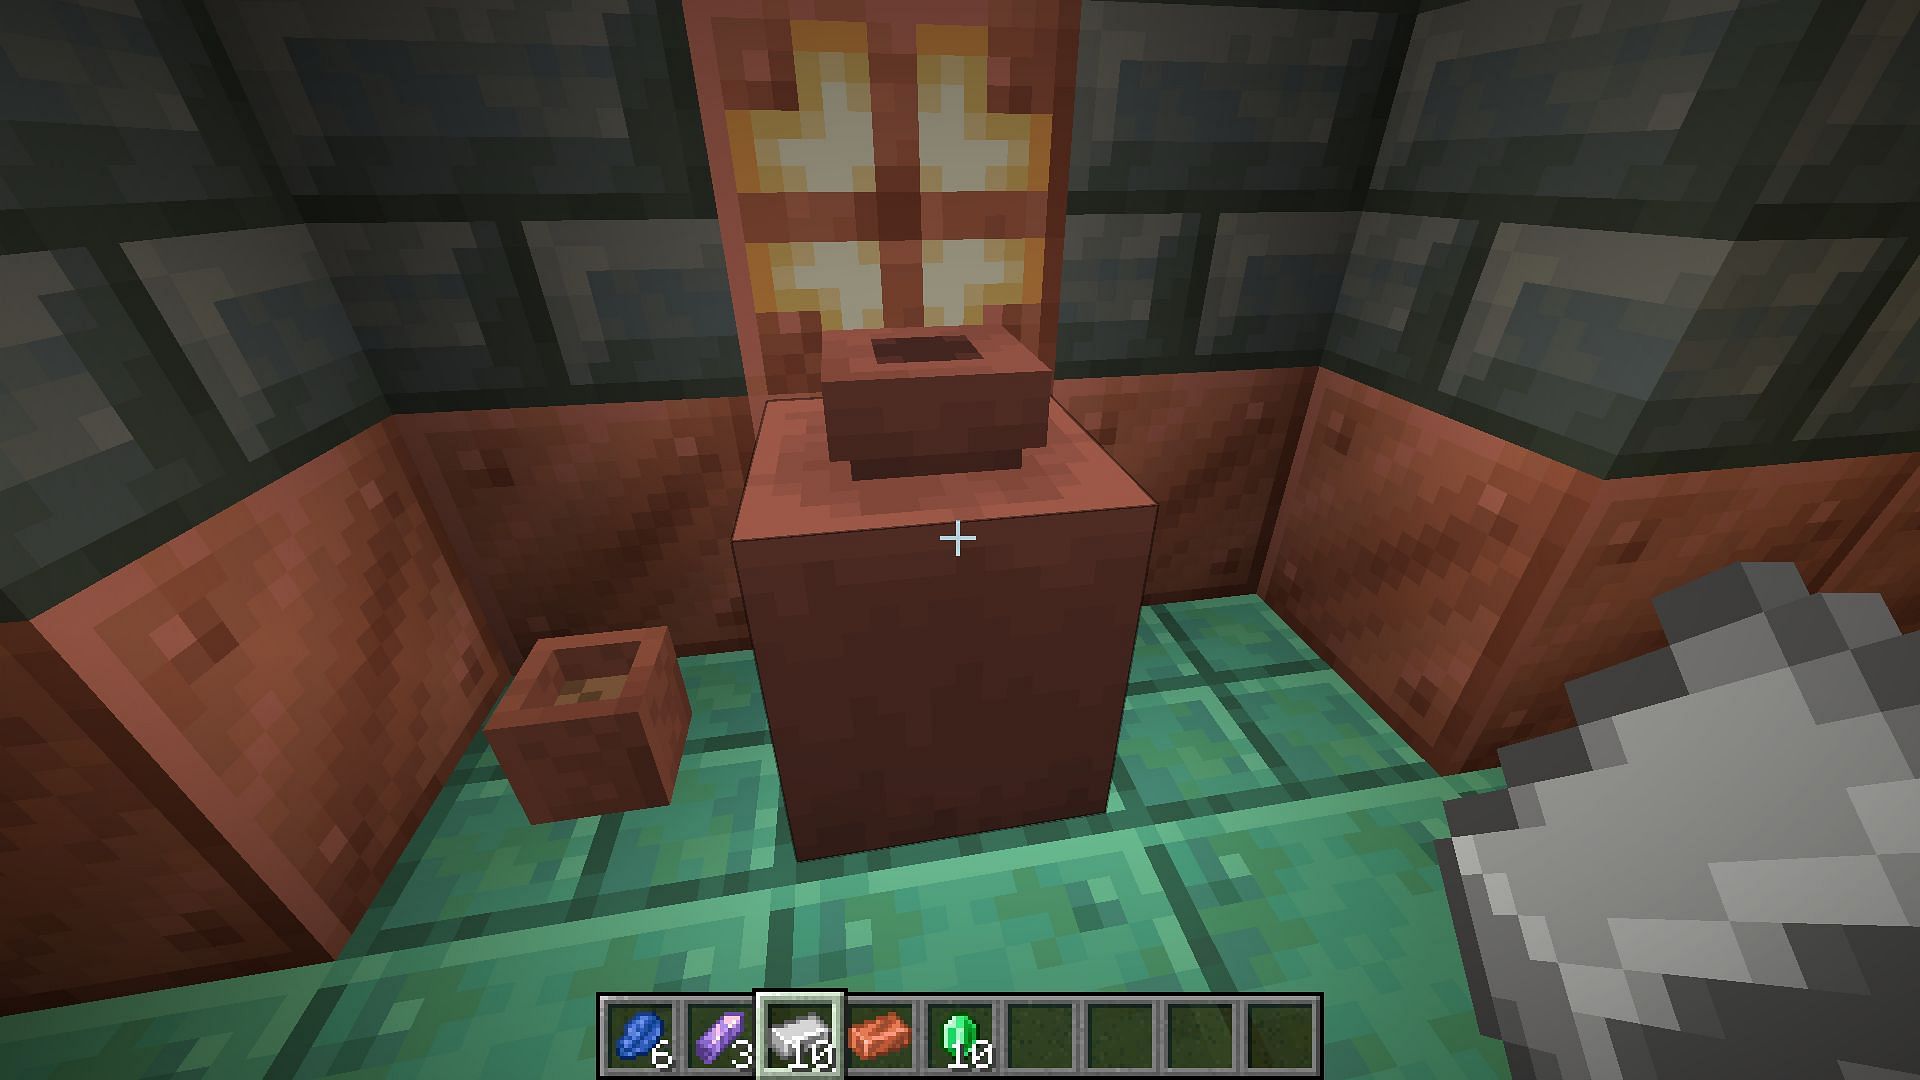 Pots can be broken to obtain some great loot in Minecraft (Image via Mojang)